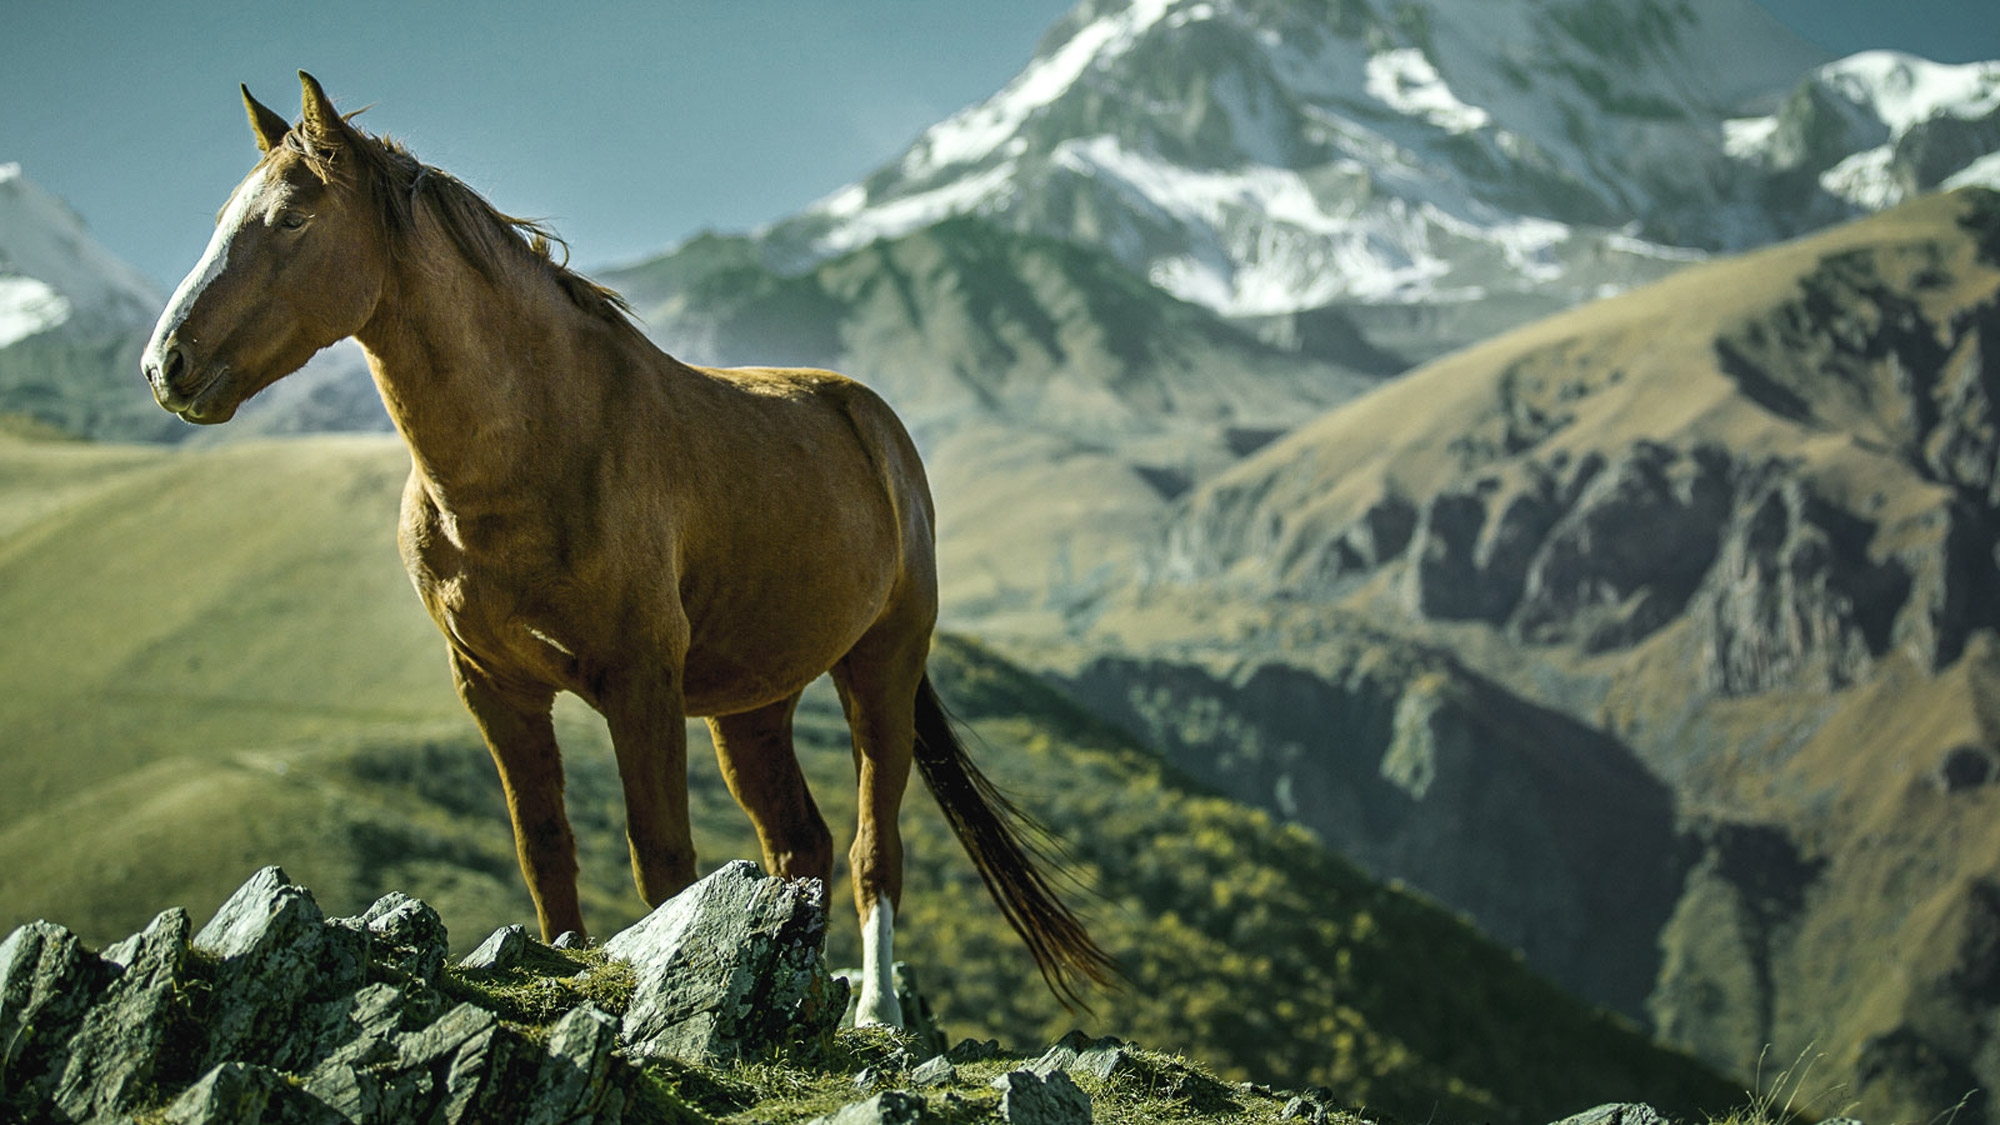 A horse in a deserted mountain landscape